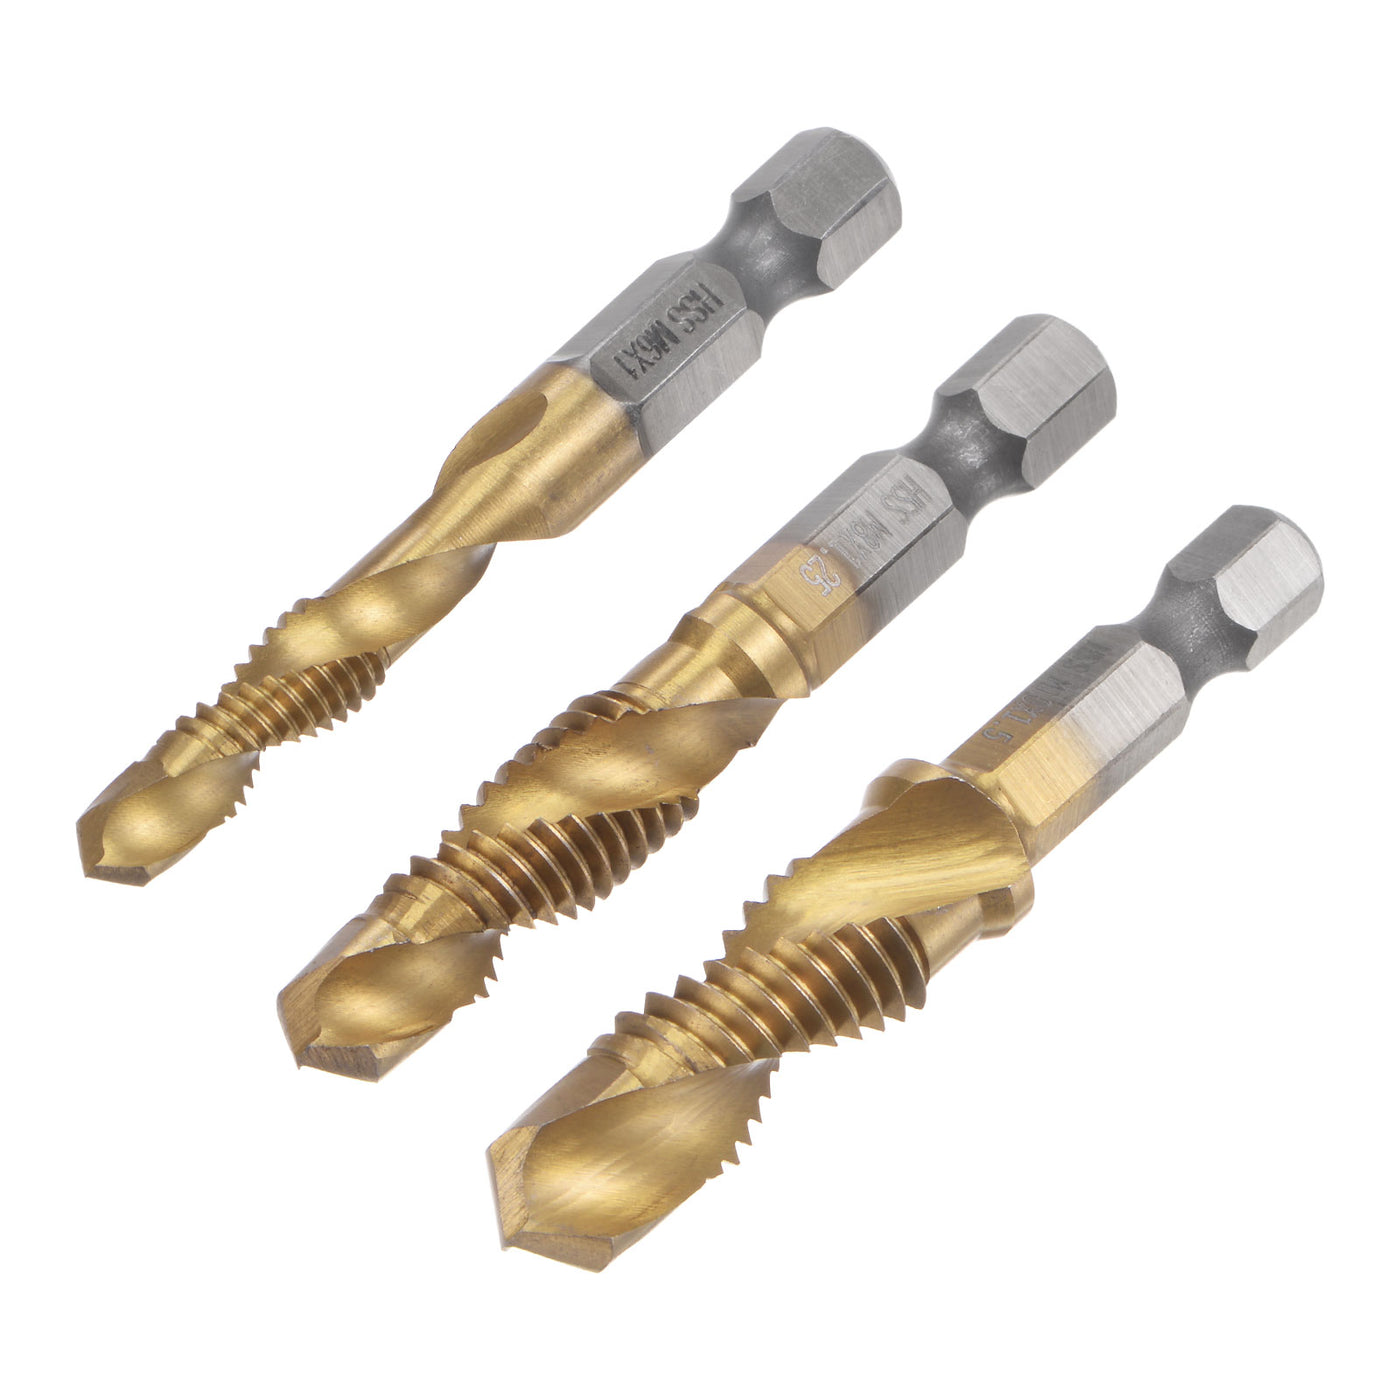 uxcell Uxcell M6 M8 M10 Titanium Coated High Speed Steel Combination Drill Tap Bit Set 3pcs